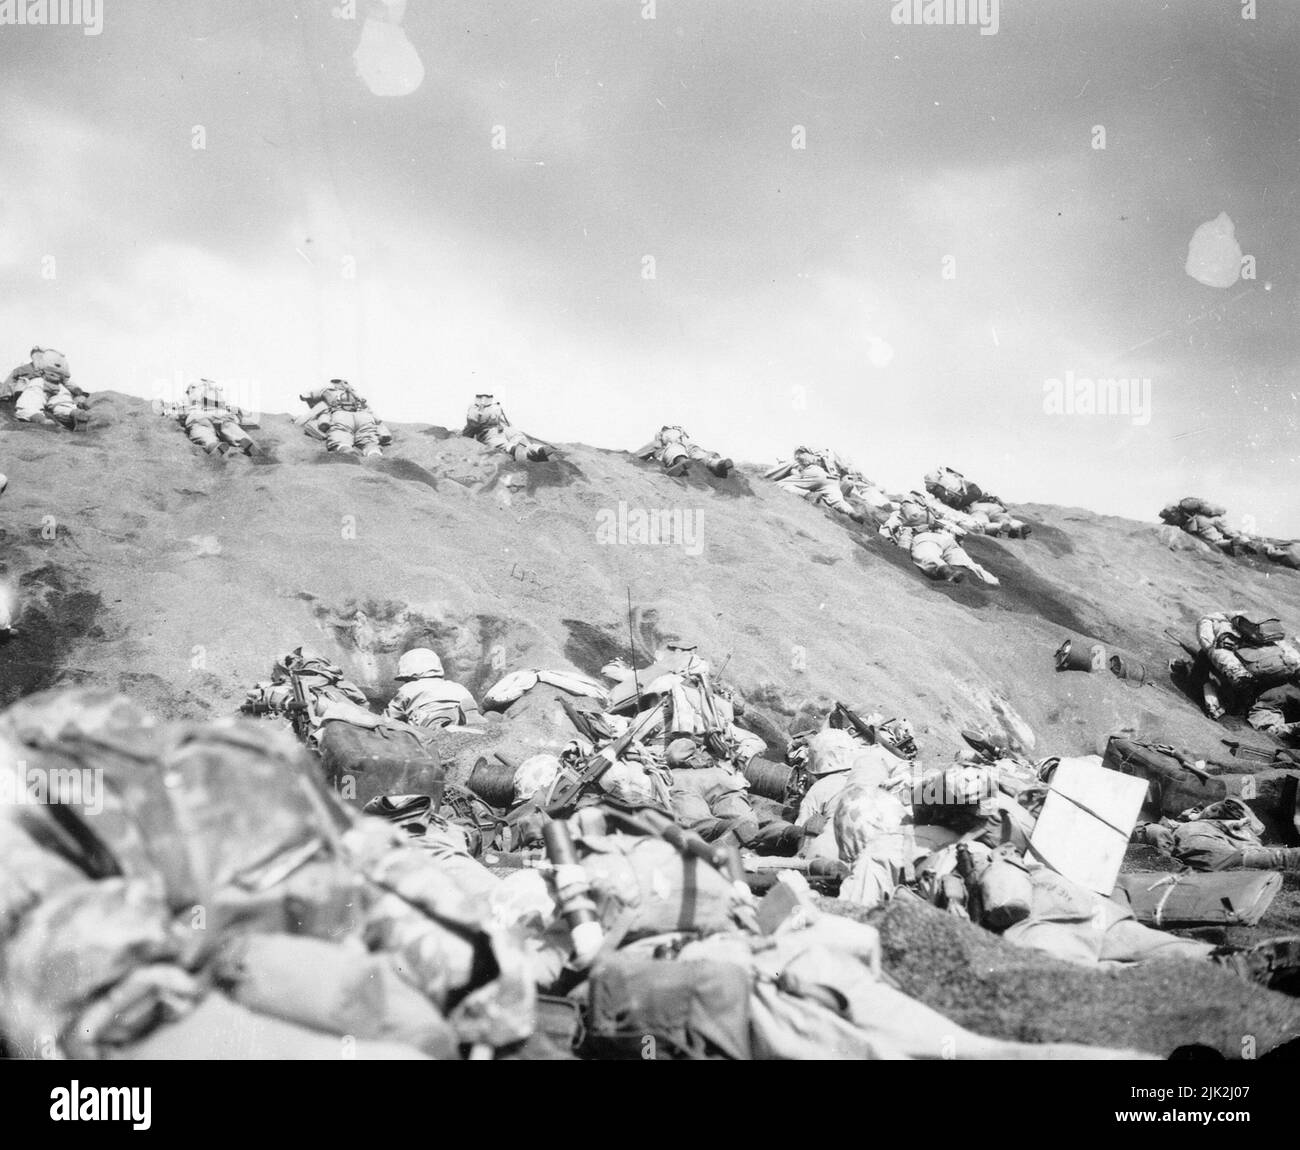 Marines of the 5th Division inch their way up a slope on Red Beach No. 1 toward Surbachi Yama as the smoke of the battle drifts about them. Stock Photo